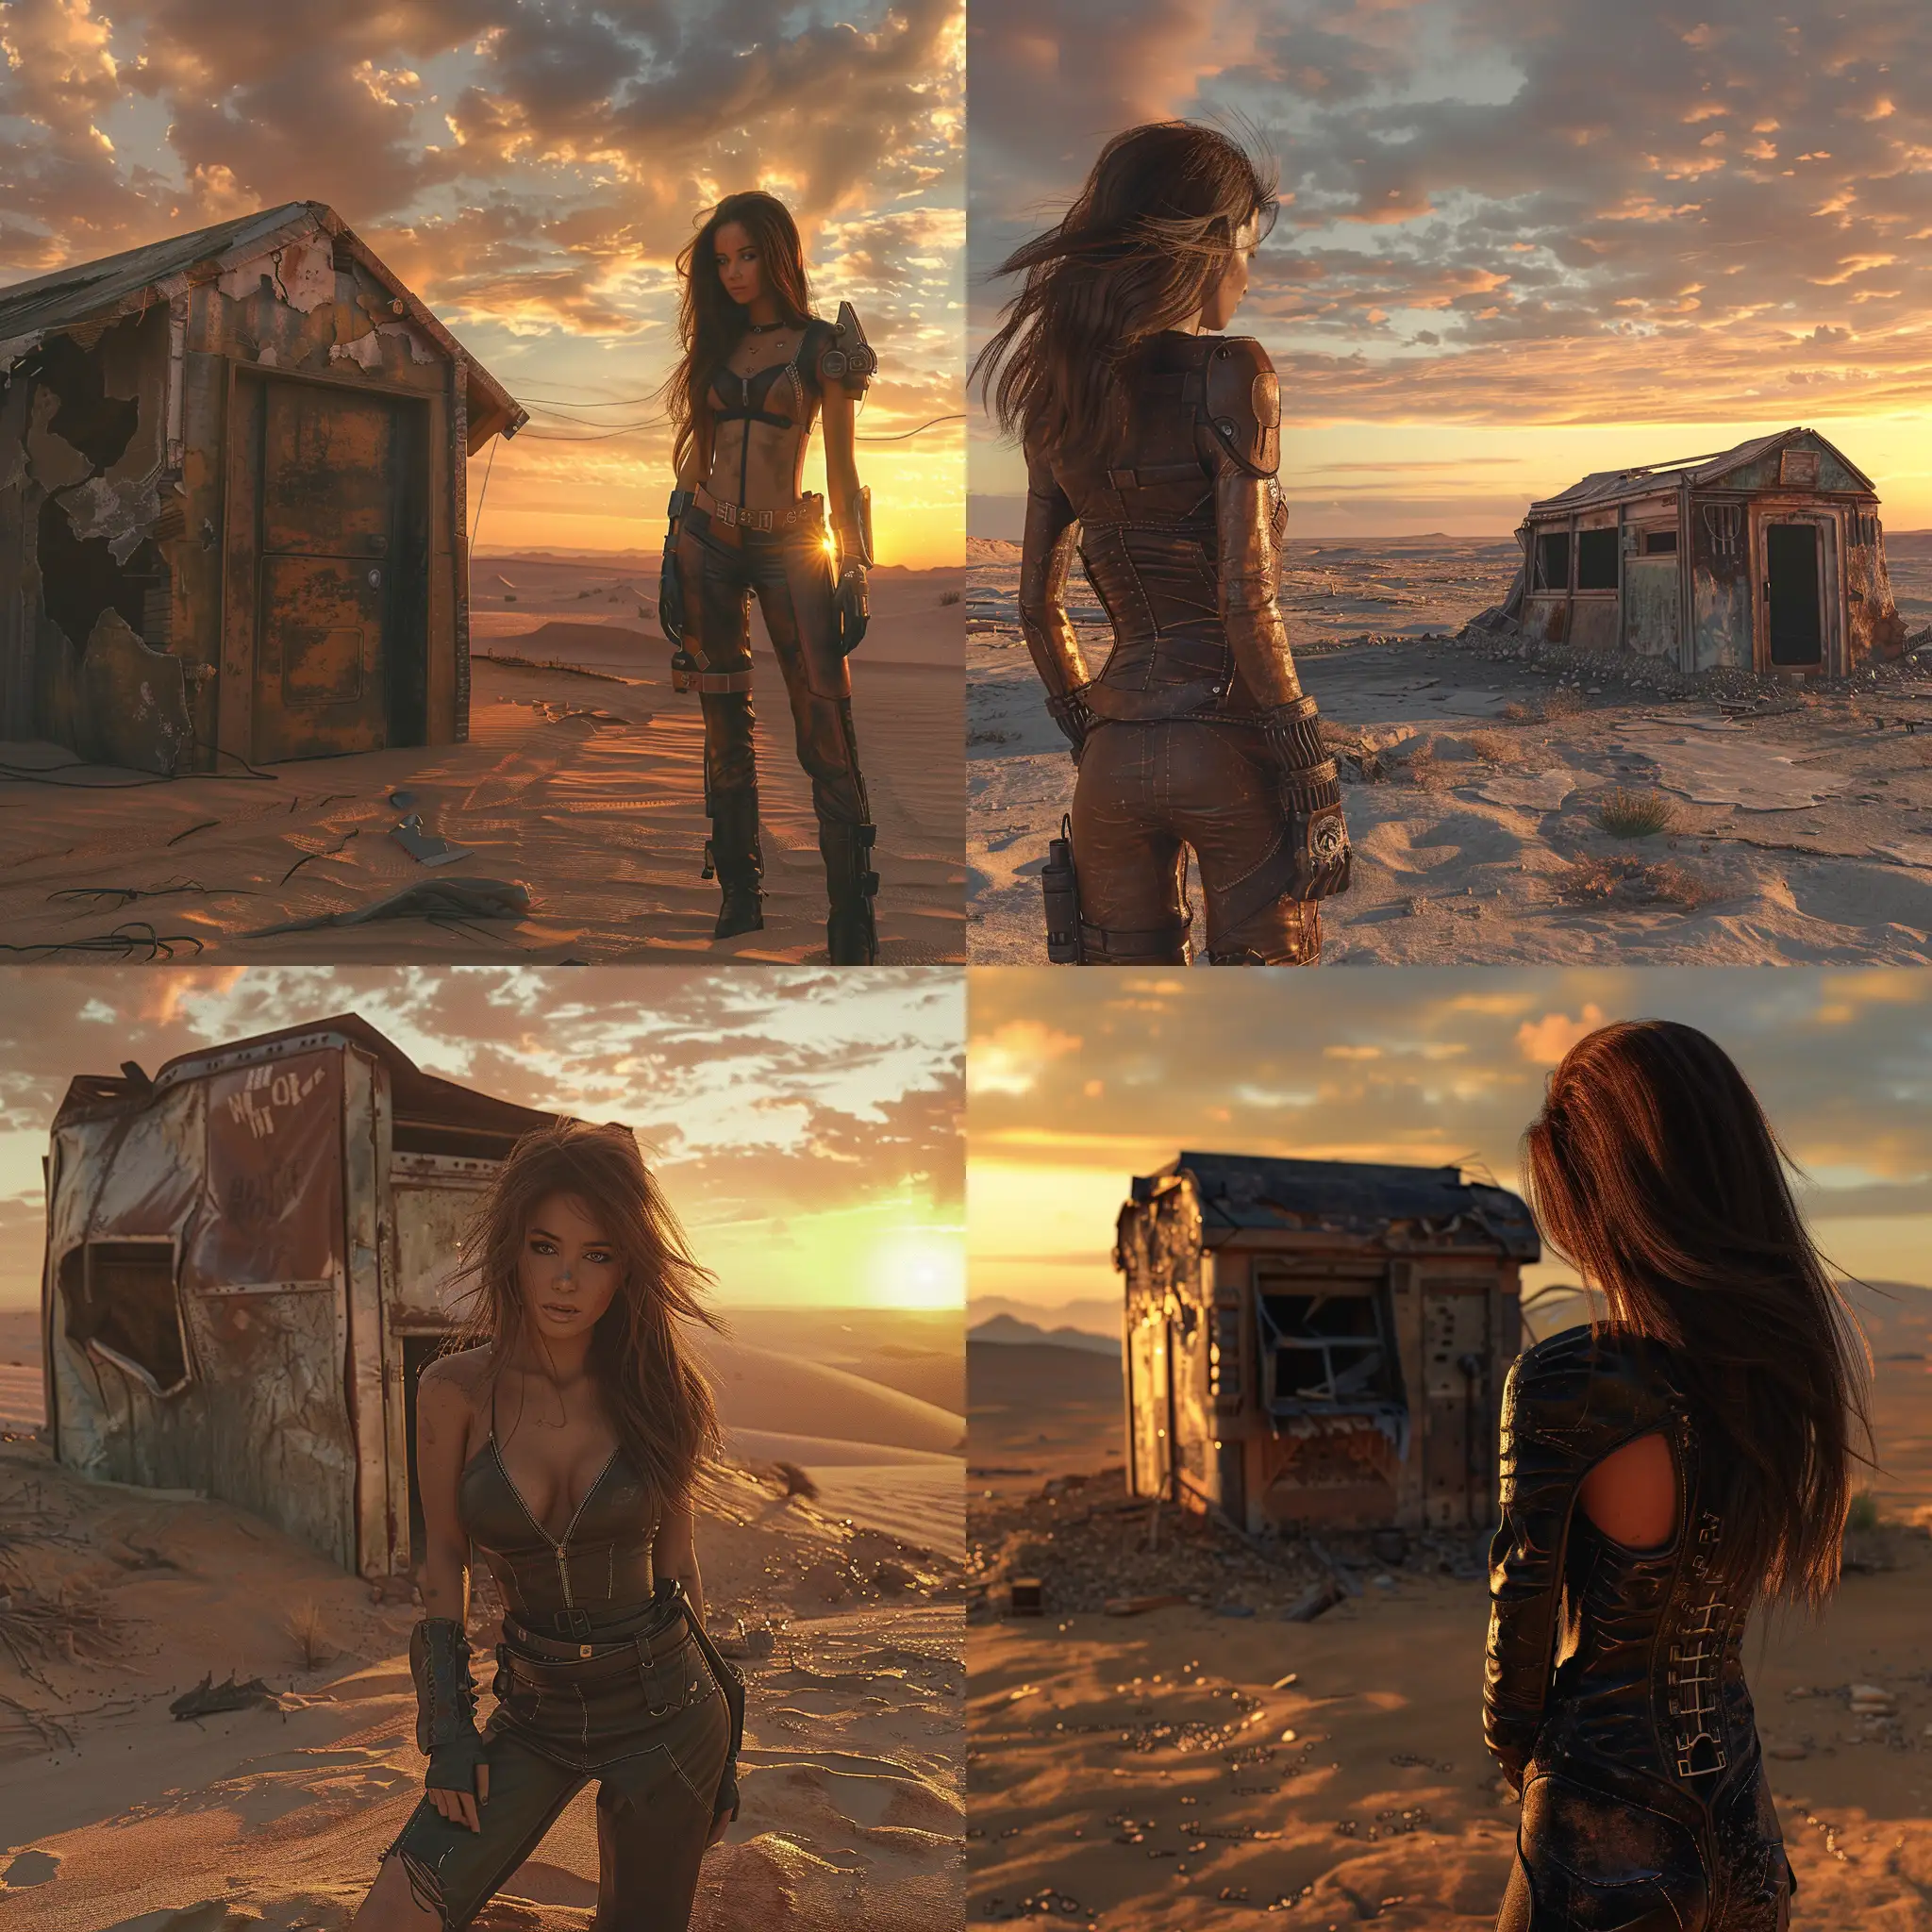 Futuristic-PostApocalyptic-Sunset-Brown-Haired-Woman-in-Leather-Clothing-near-Small-Damaged-Building